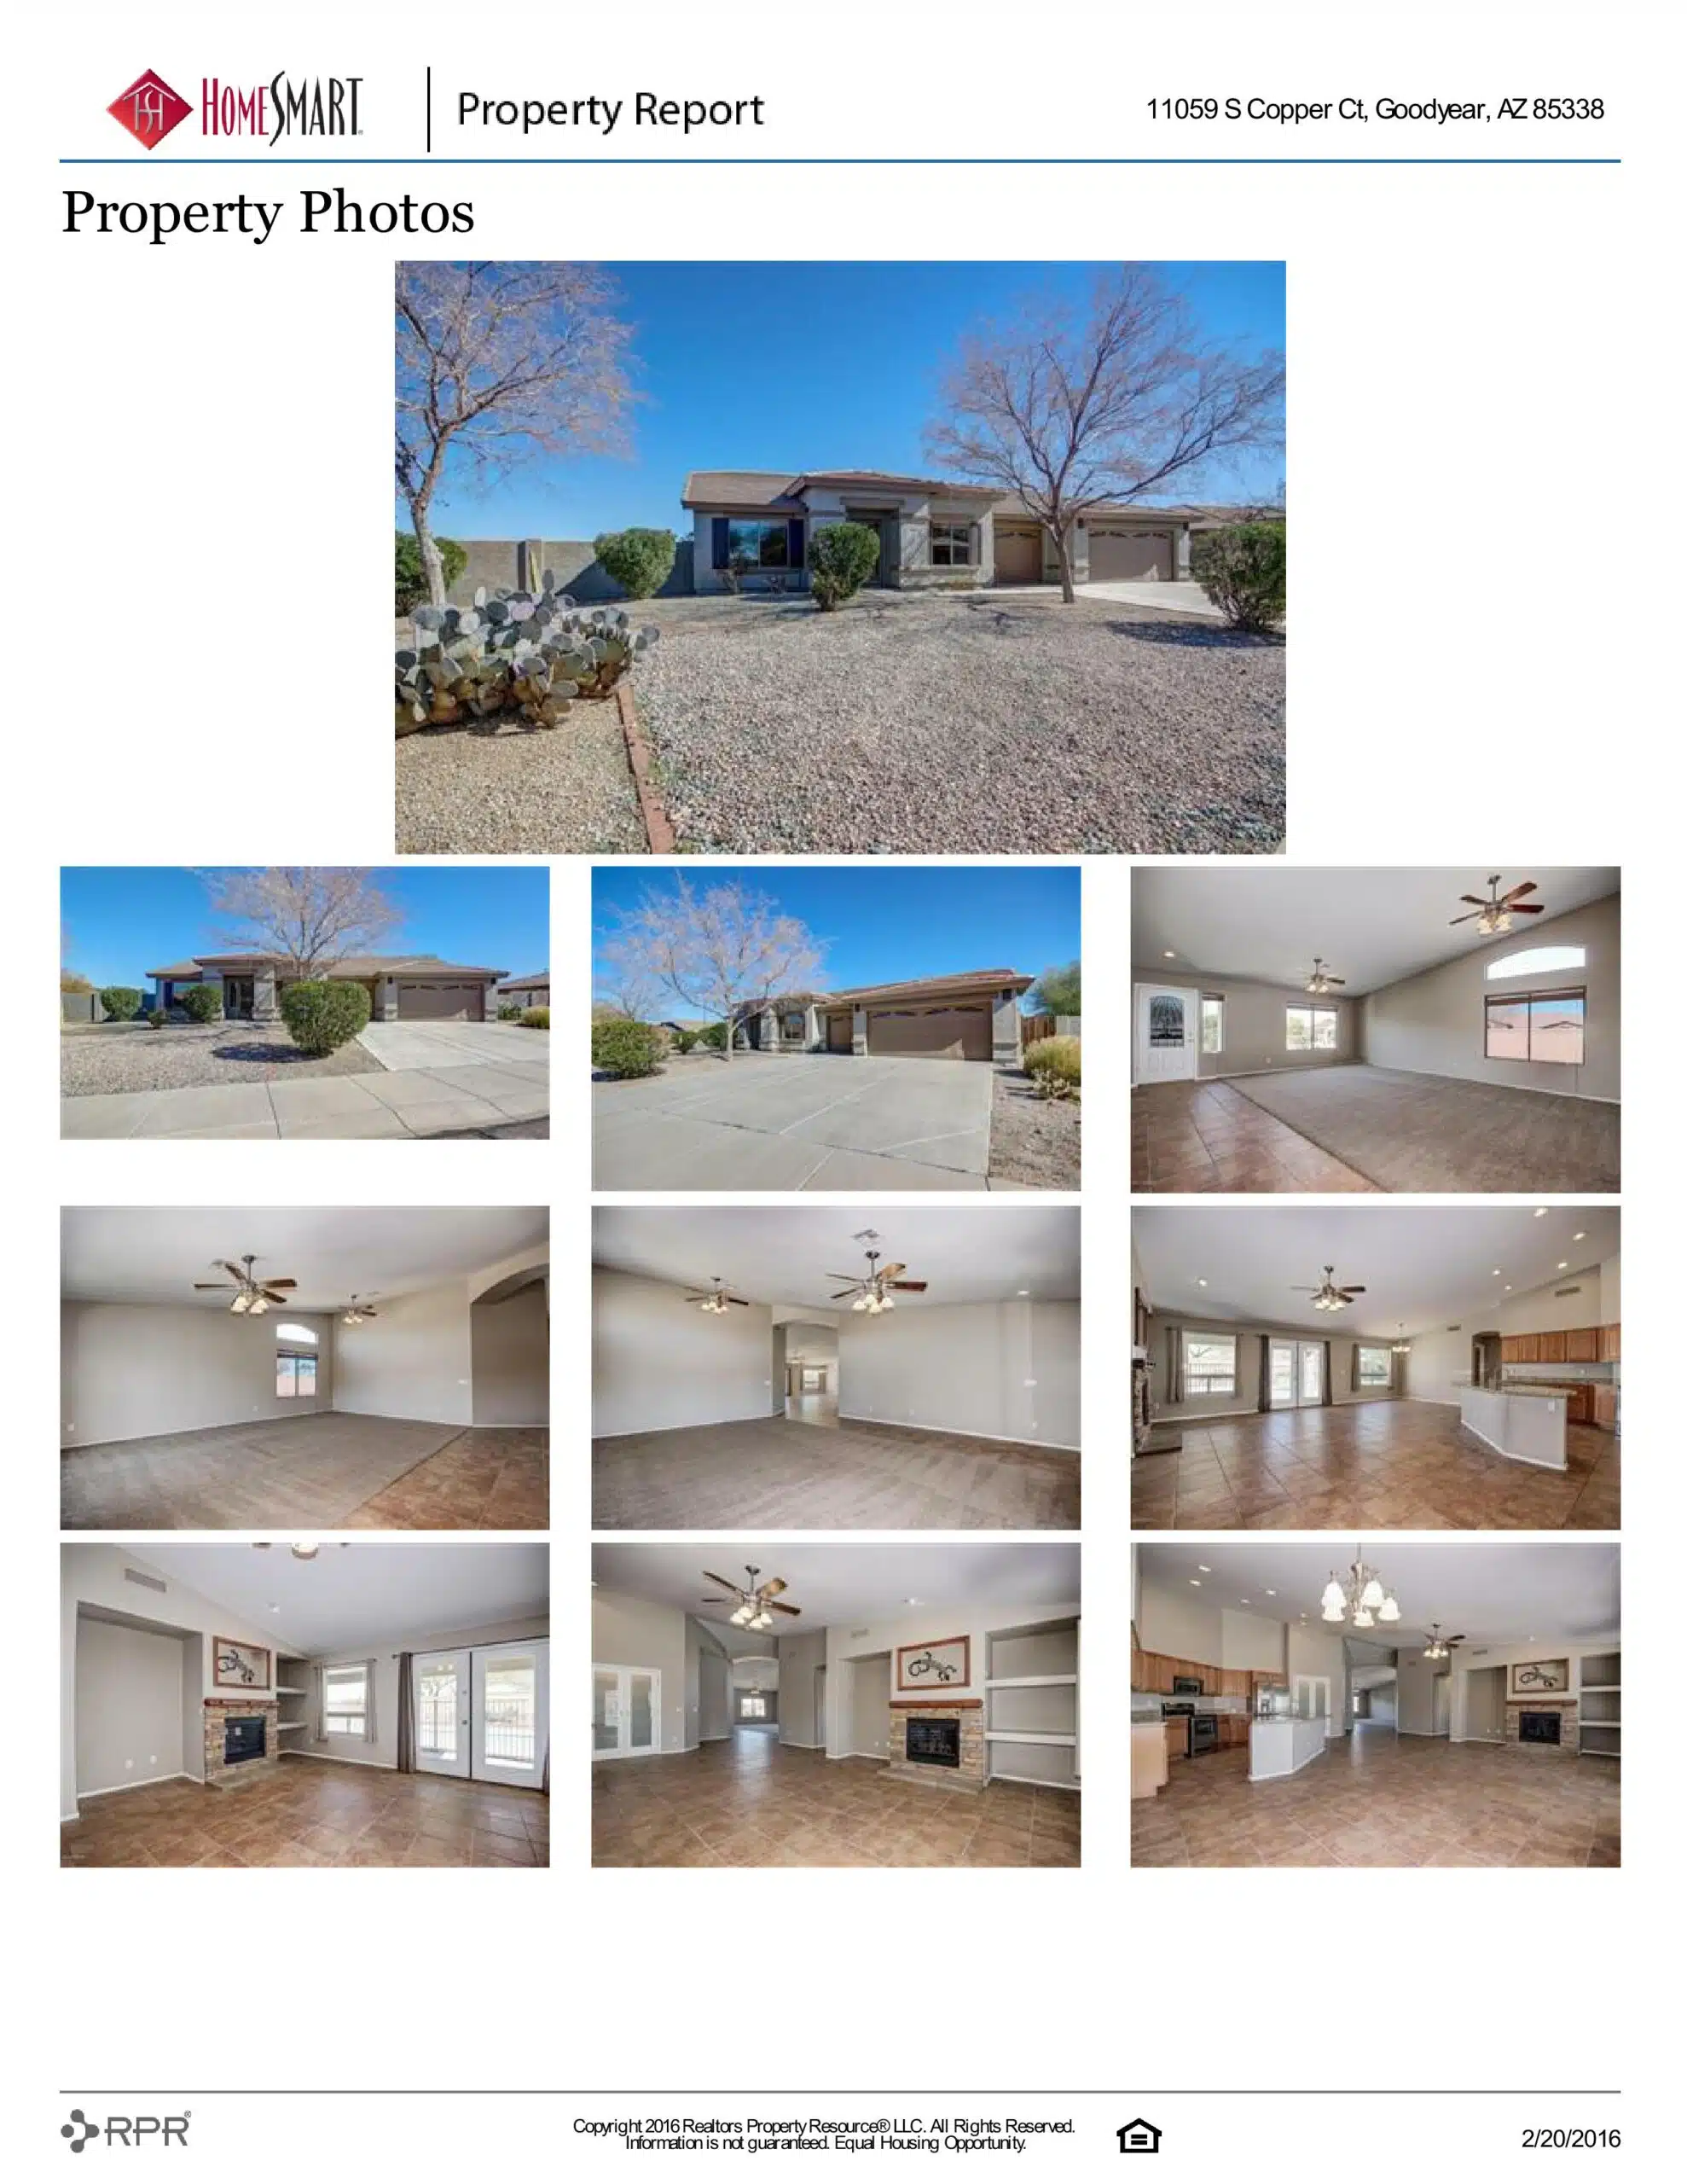 11059 S COPPER CT PROPERTY REPORT-page-006